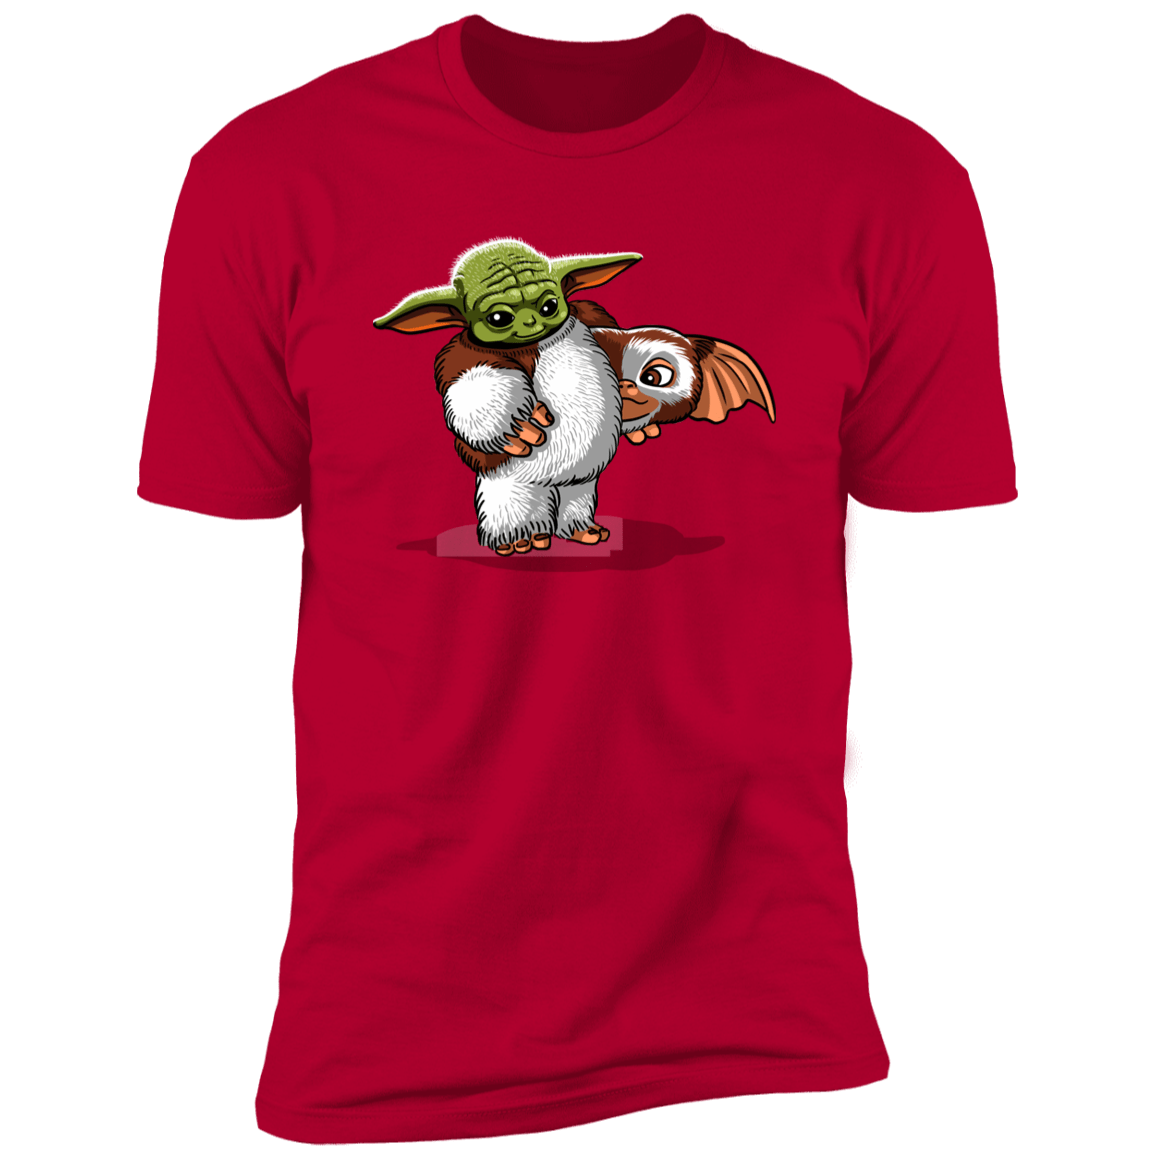 T-Shirts Red / S Baby in Disguise Men's Premium T-Shirt